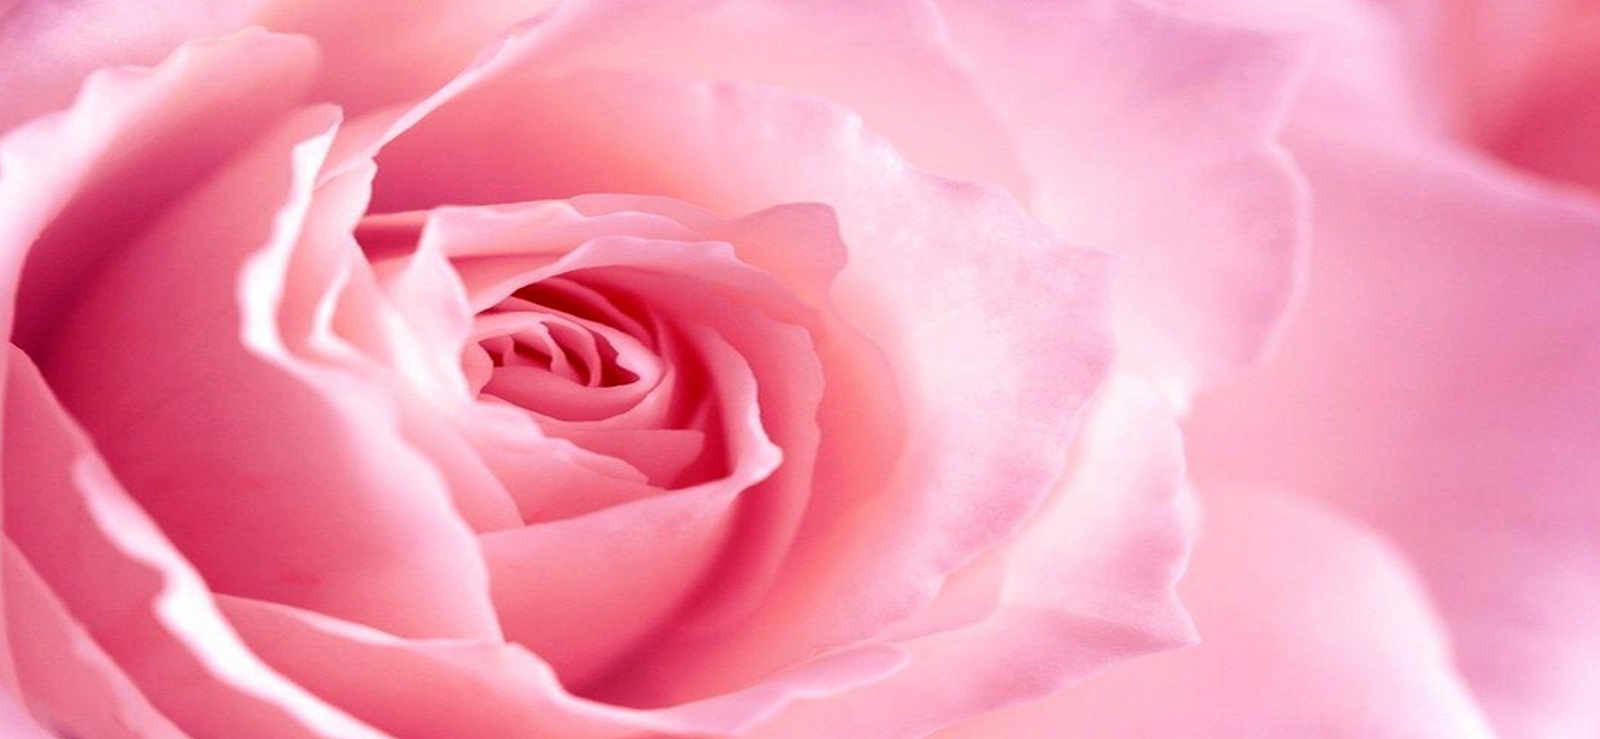 Cute Girly Wallpapers For Iphone - Garden Roses - HD Wallpaper 